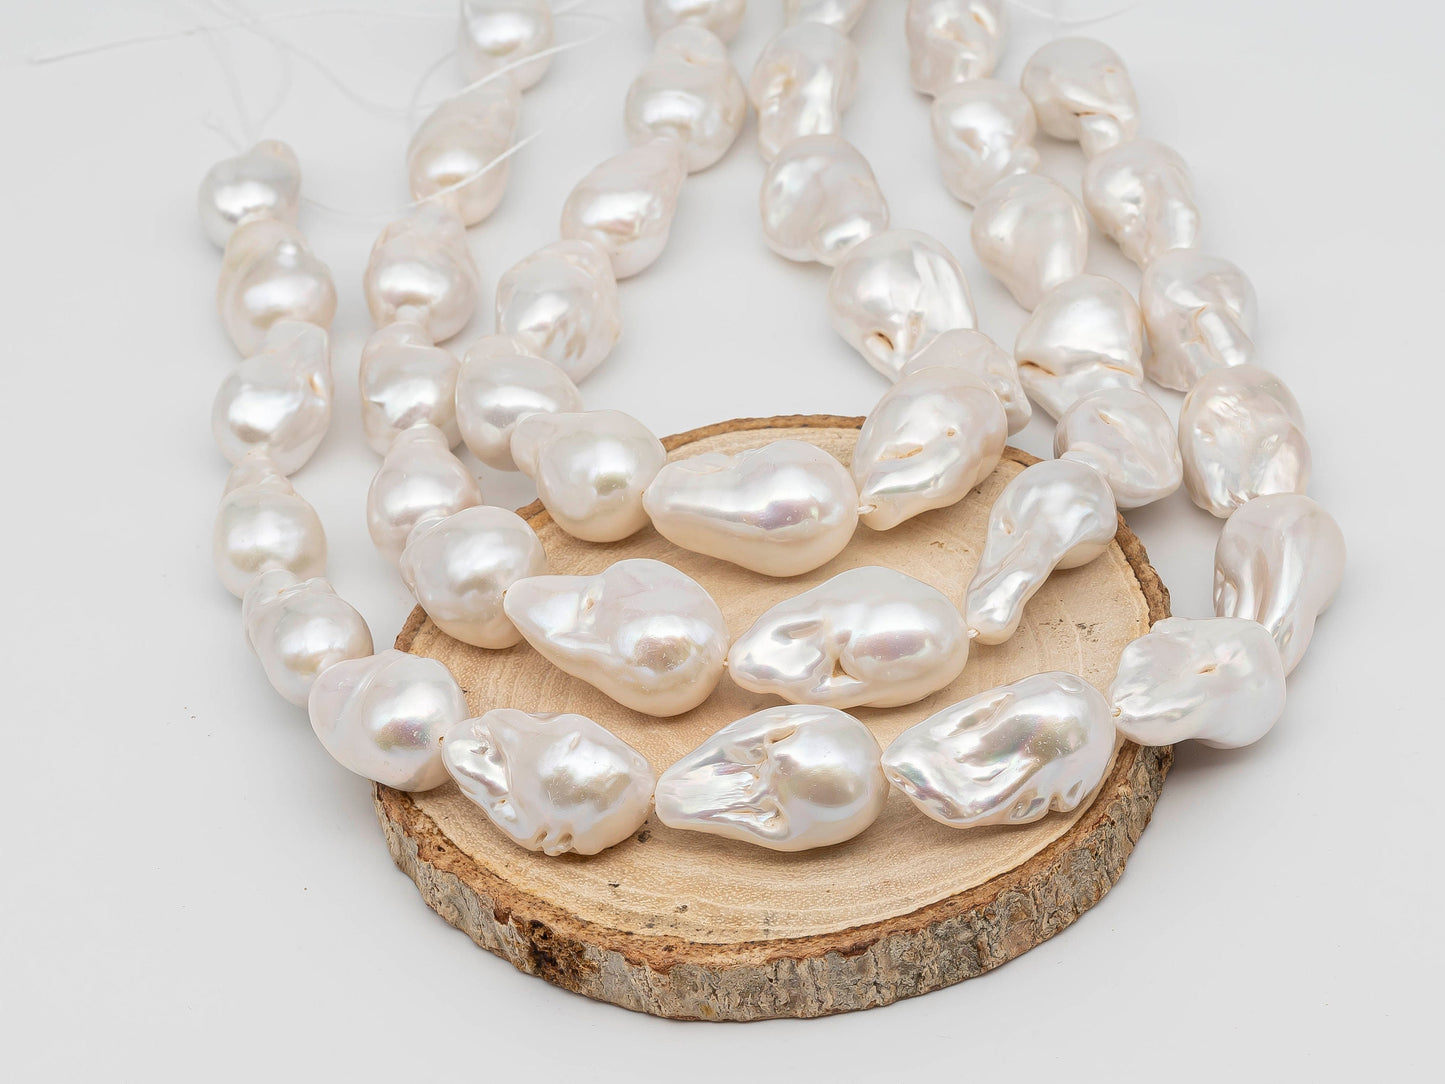 15-18mm White Baroque Flameball Pearl with High Luster for Beading or Jewelry Making, SKU # 1260BA